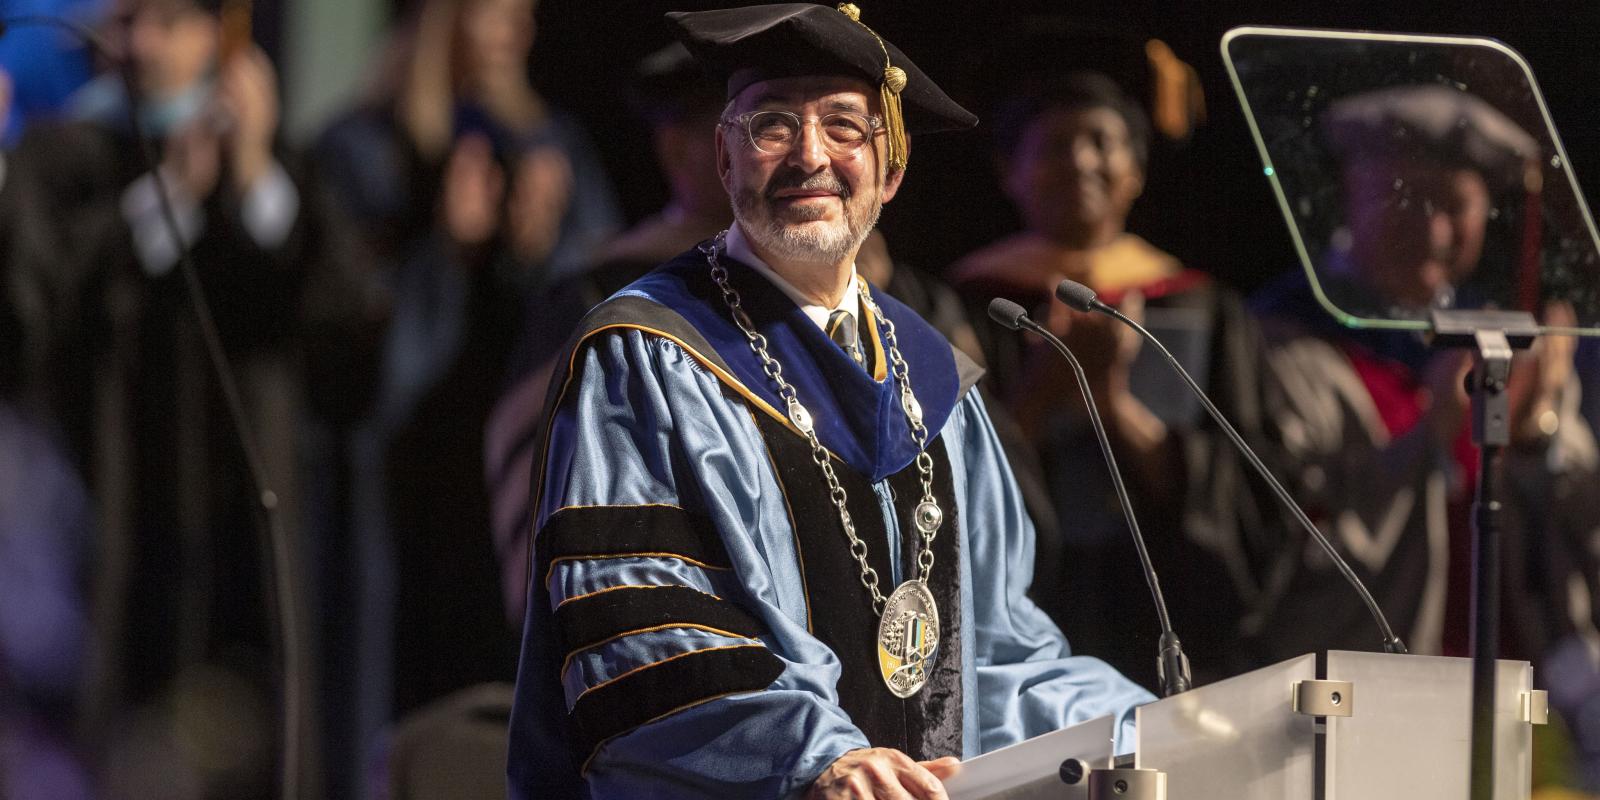 Chancellor Grasso challenged people to dream big during his inaugural address.